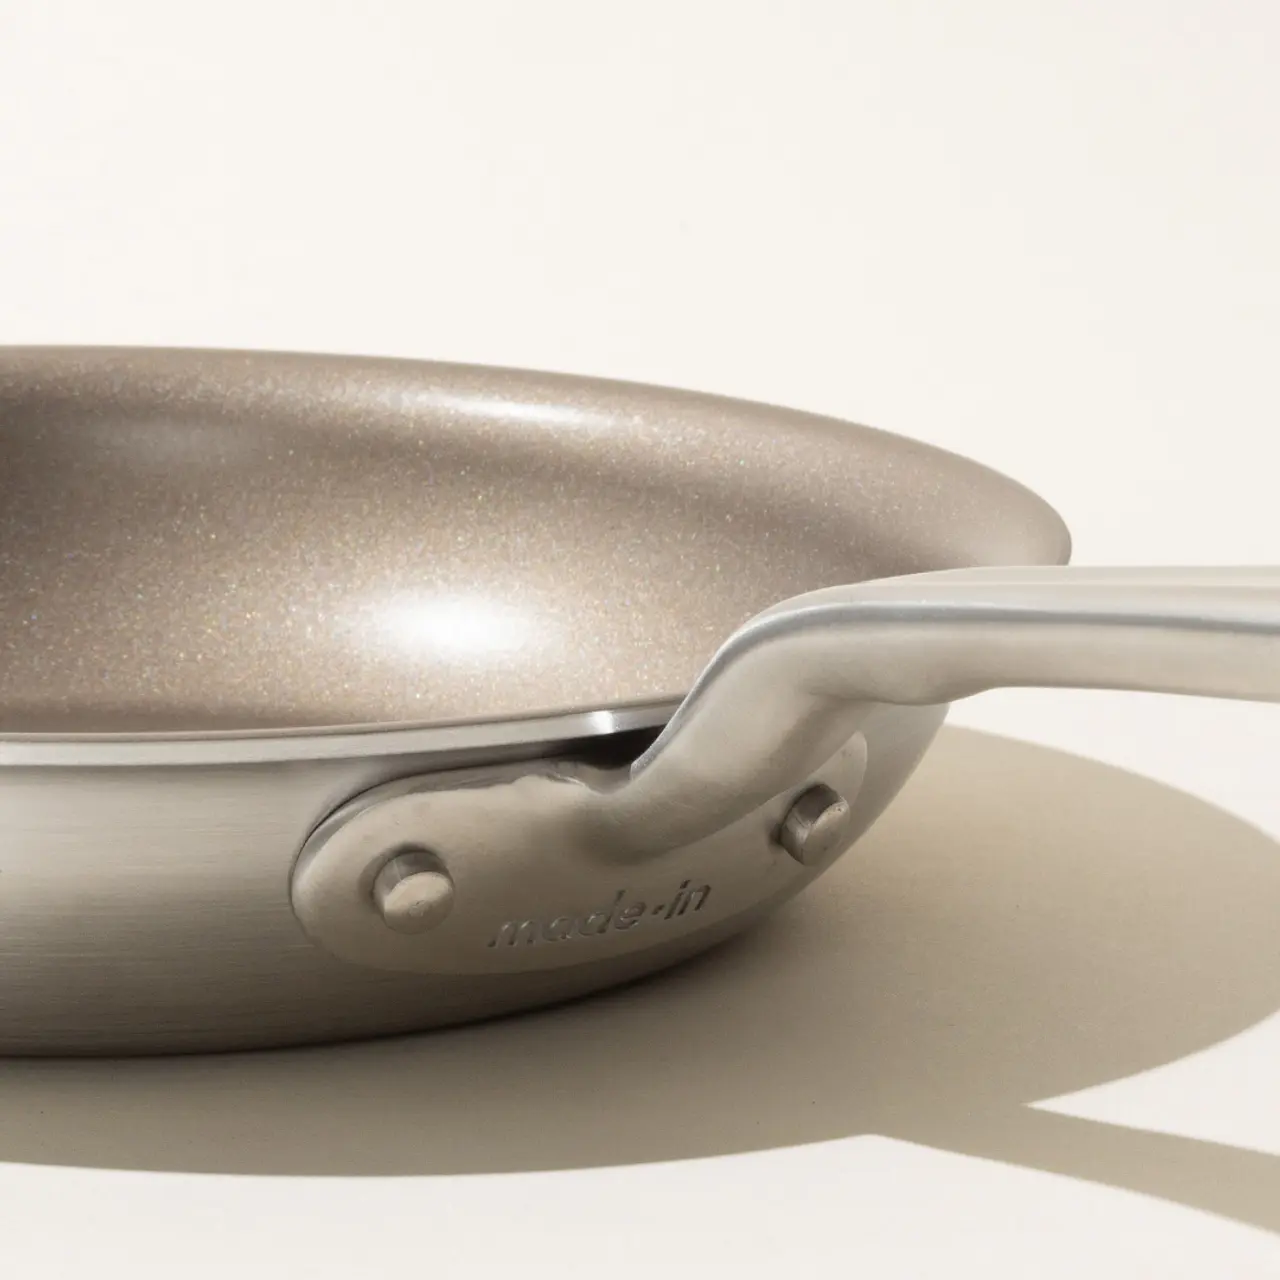 Close-up side view of a modern frying pan with a silver handle on a light background.